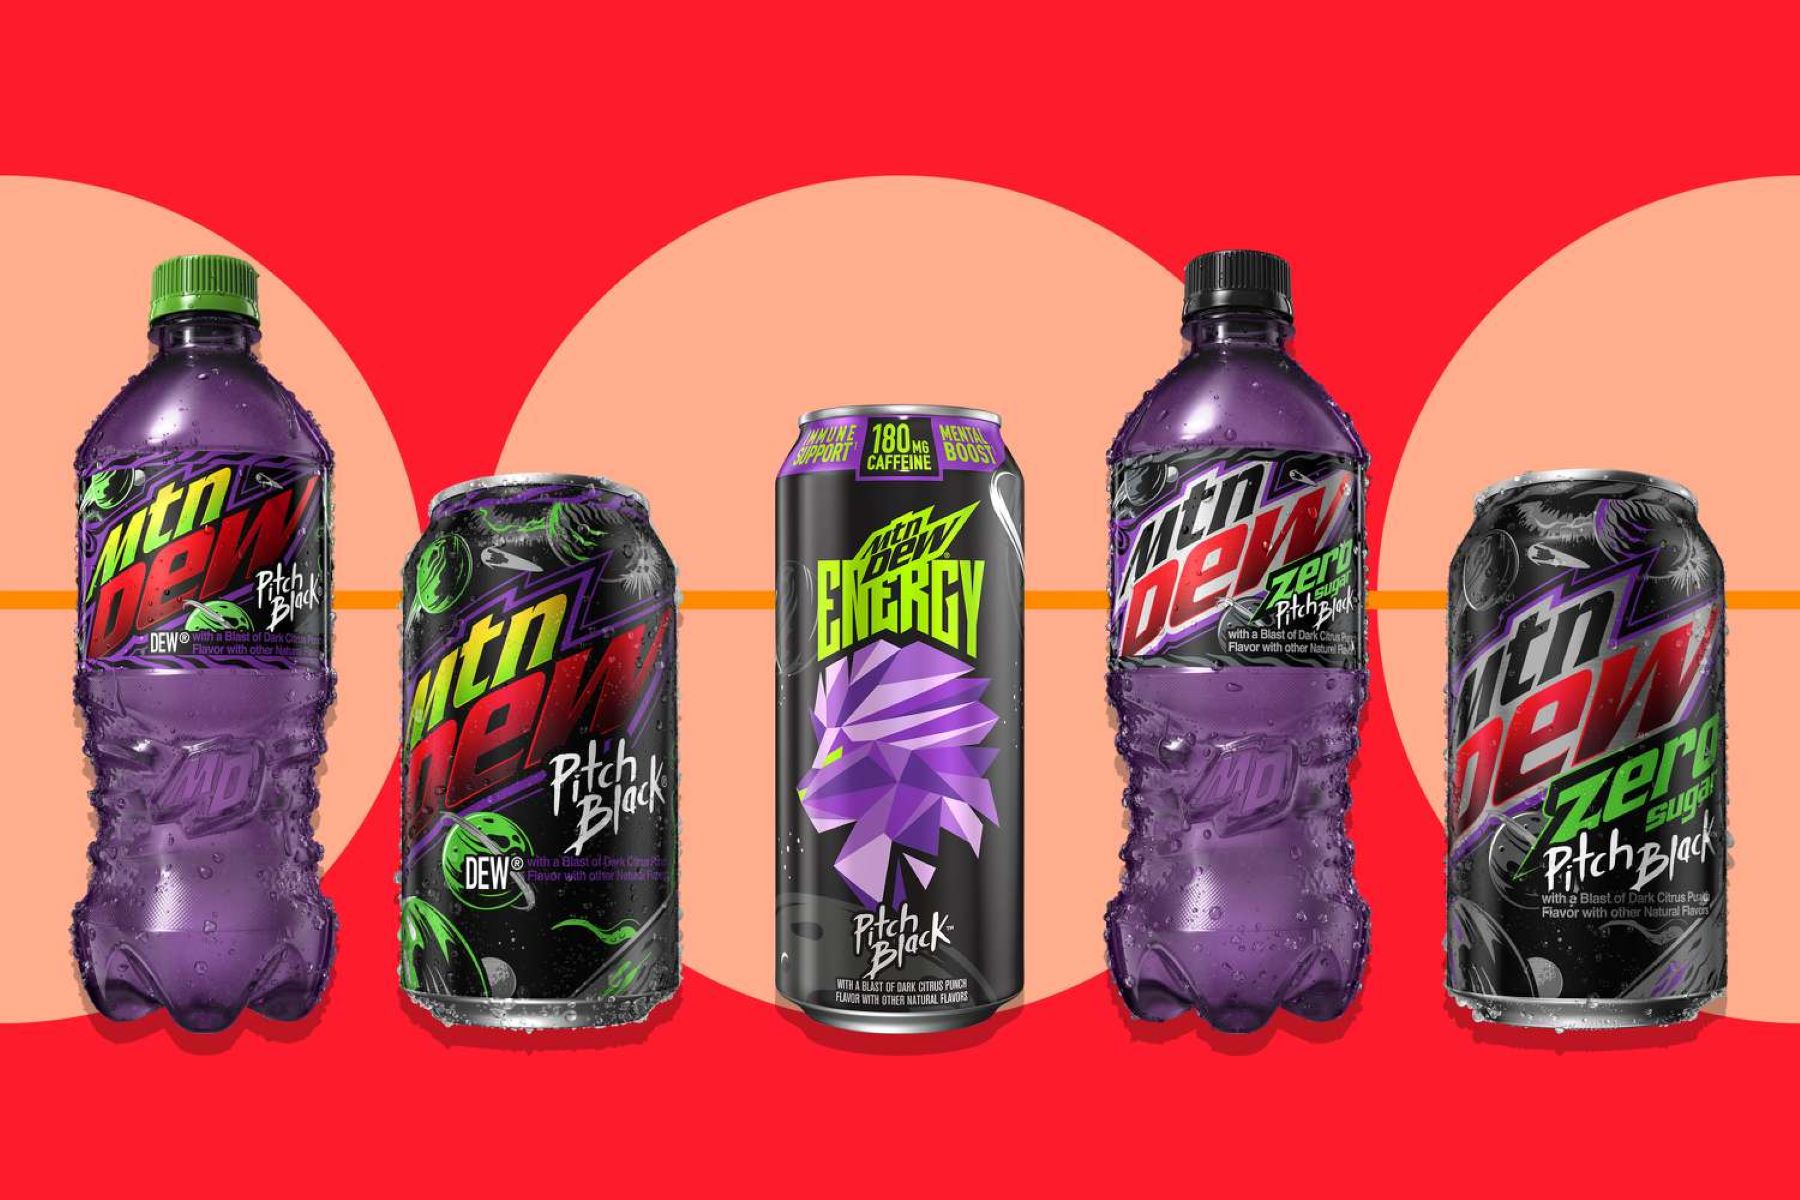 11-mountain-dew-pitch-black-nutrition-facts